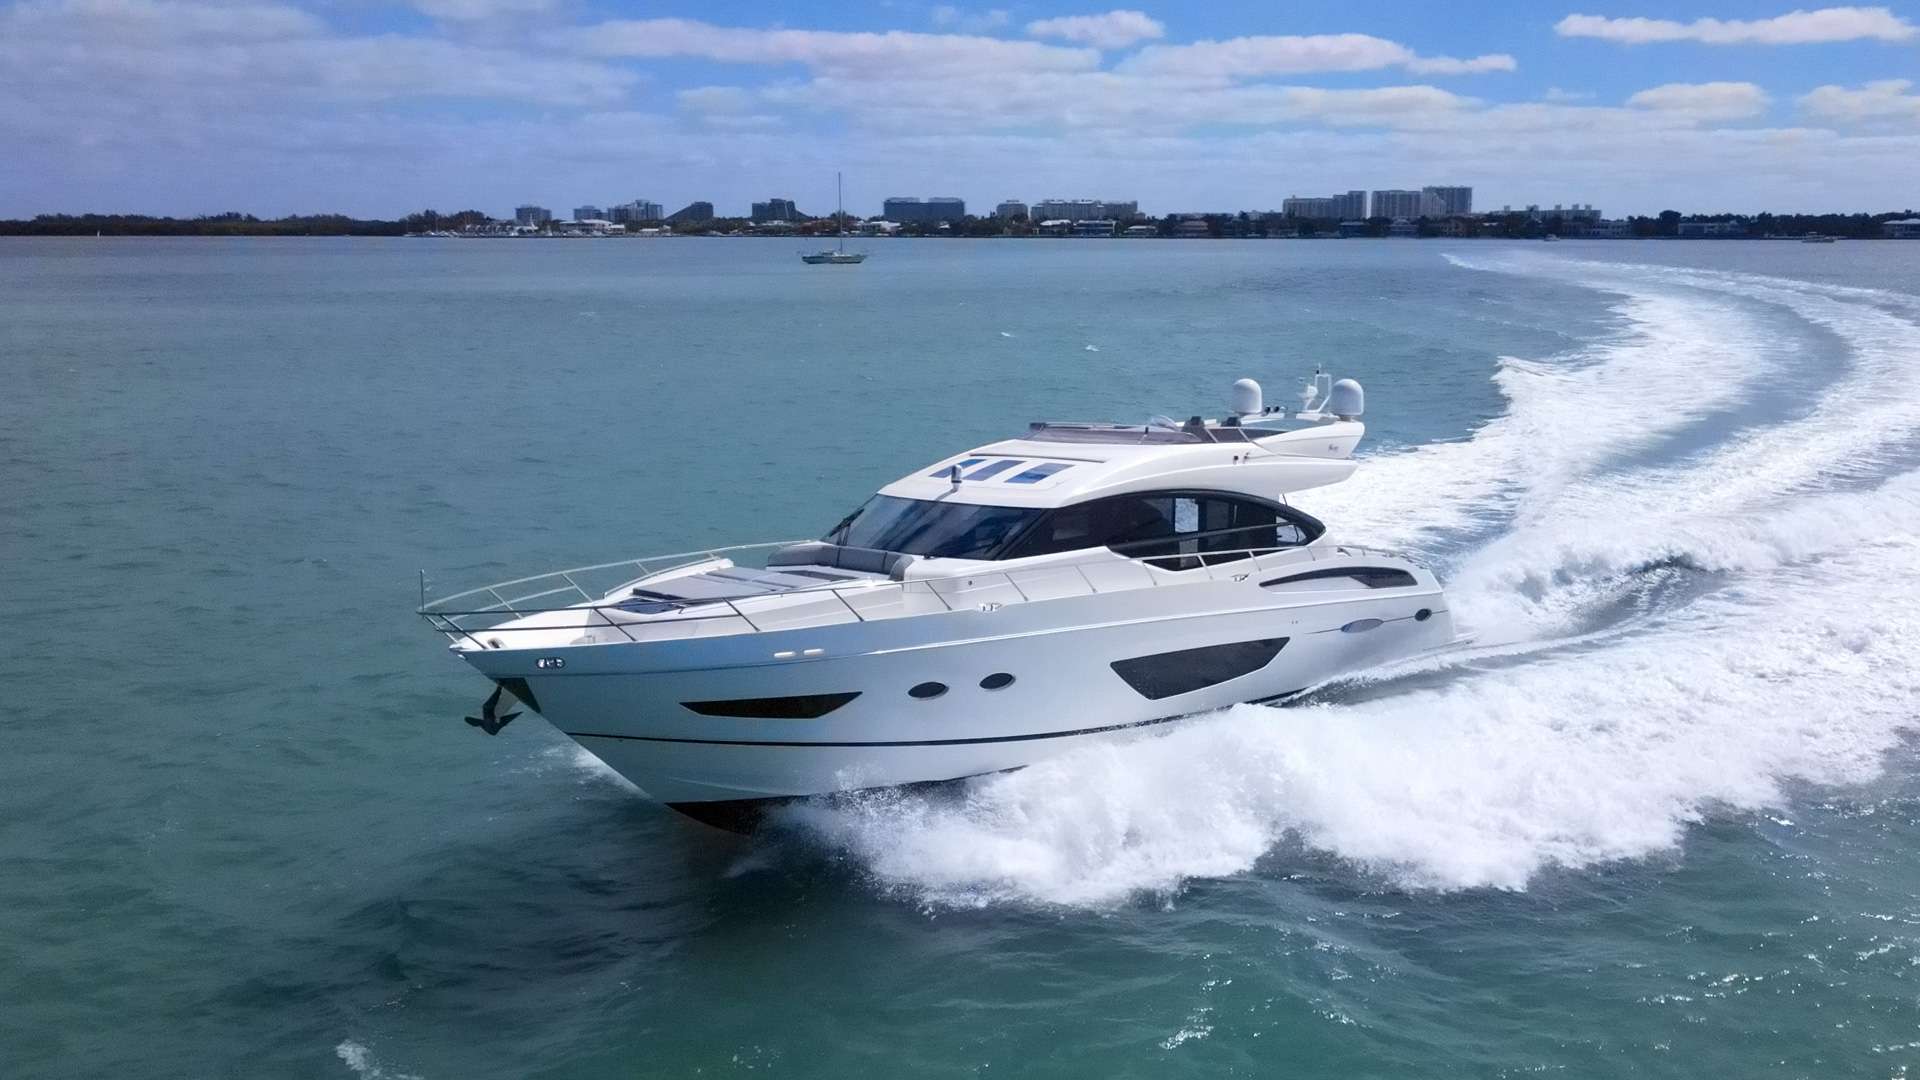 Snowbird - Yacht Charter Fort Lauderdale & Boat hire in Florida 1